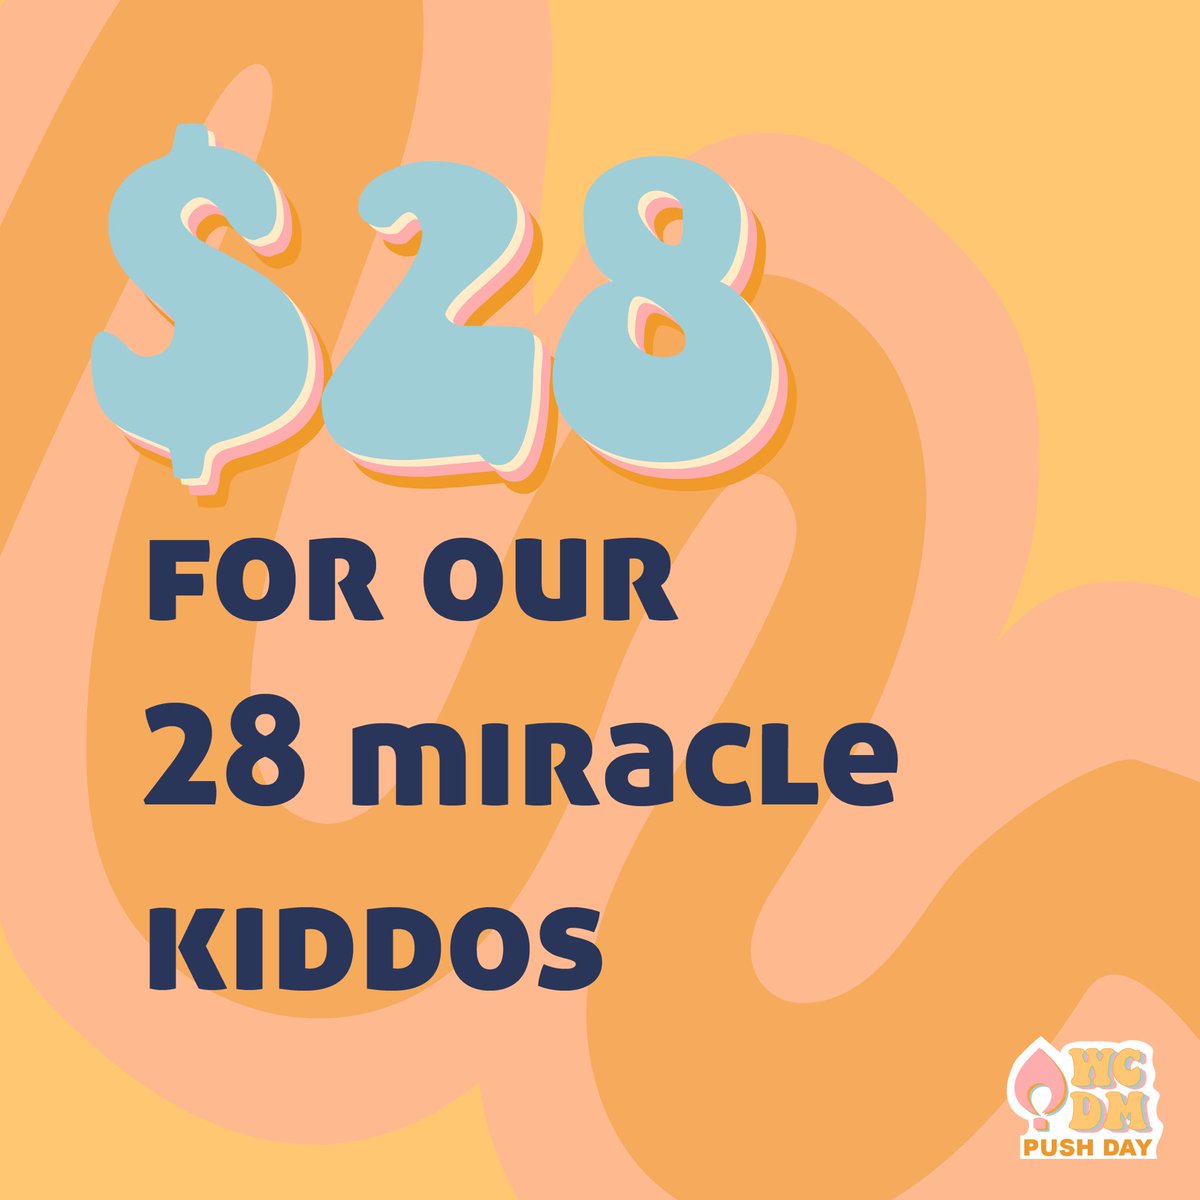 Our WCDM team challenges you to fundraise $28 this hour for our 28 awesome miracle kiddos we have on our team! Keep working hard and let’s keep #GroovinOurWayTo40k